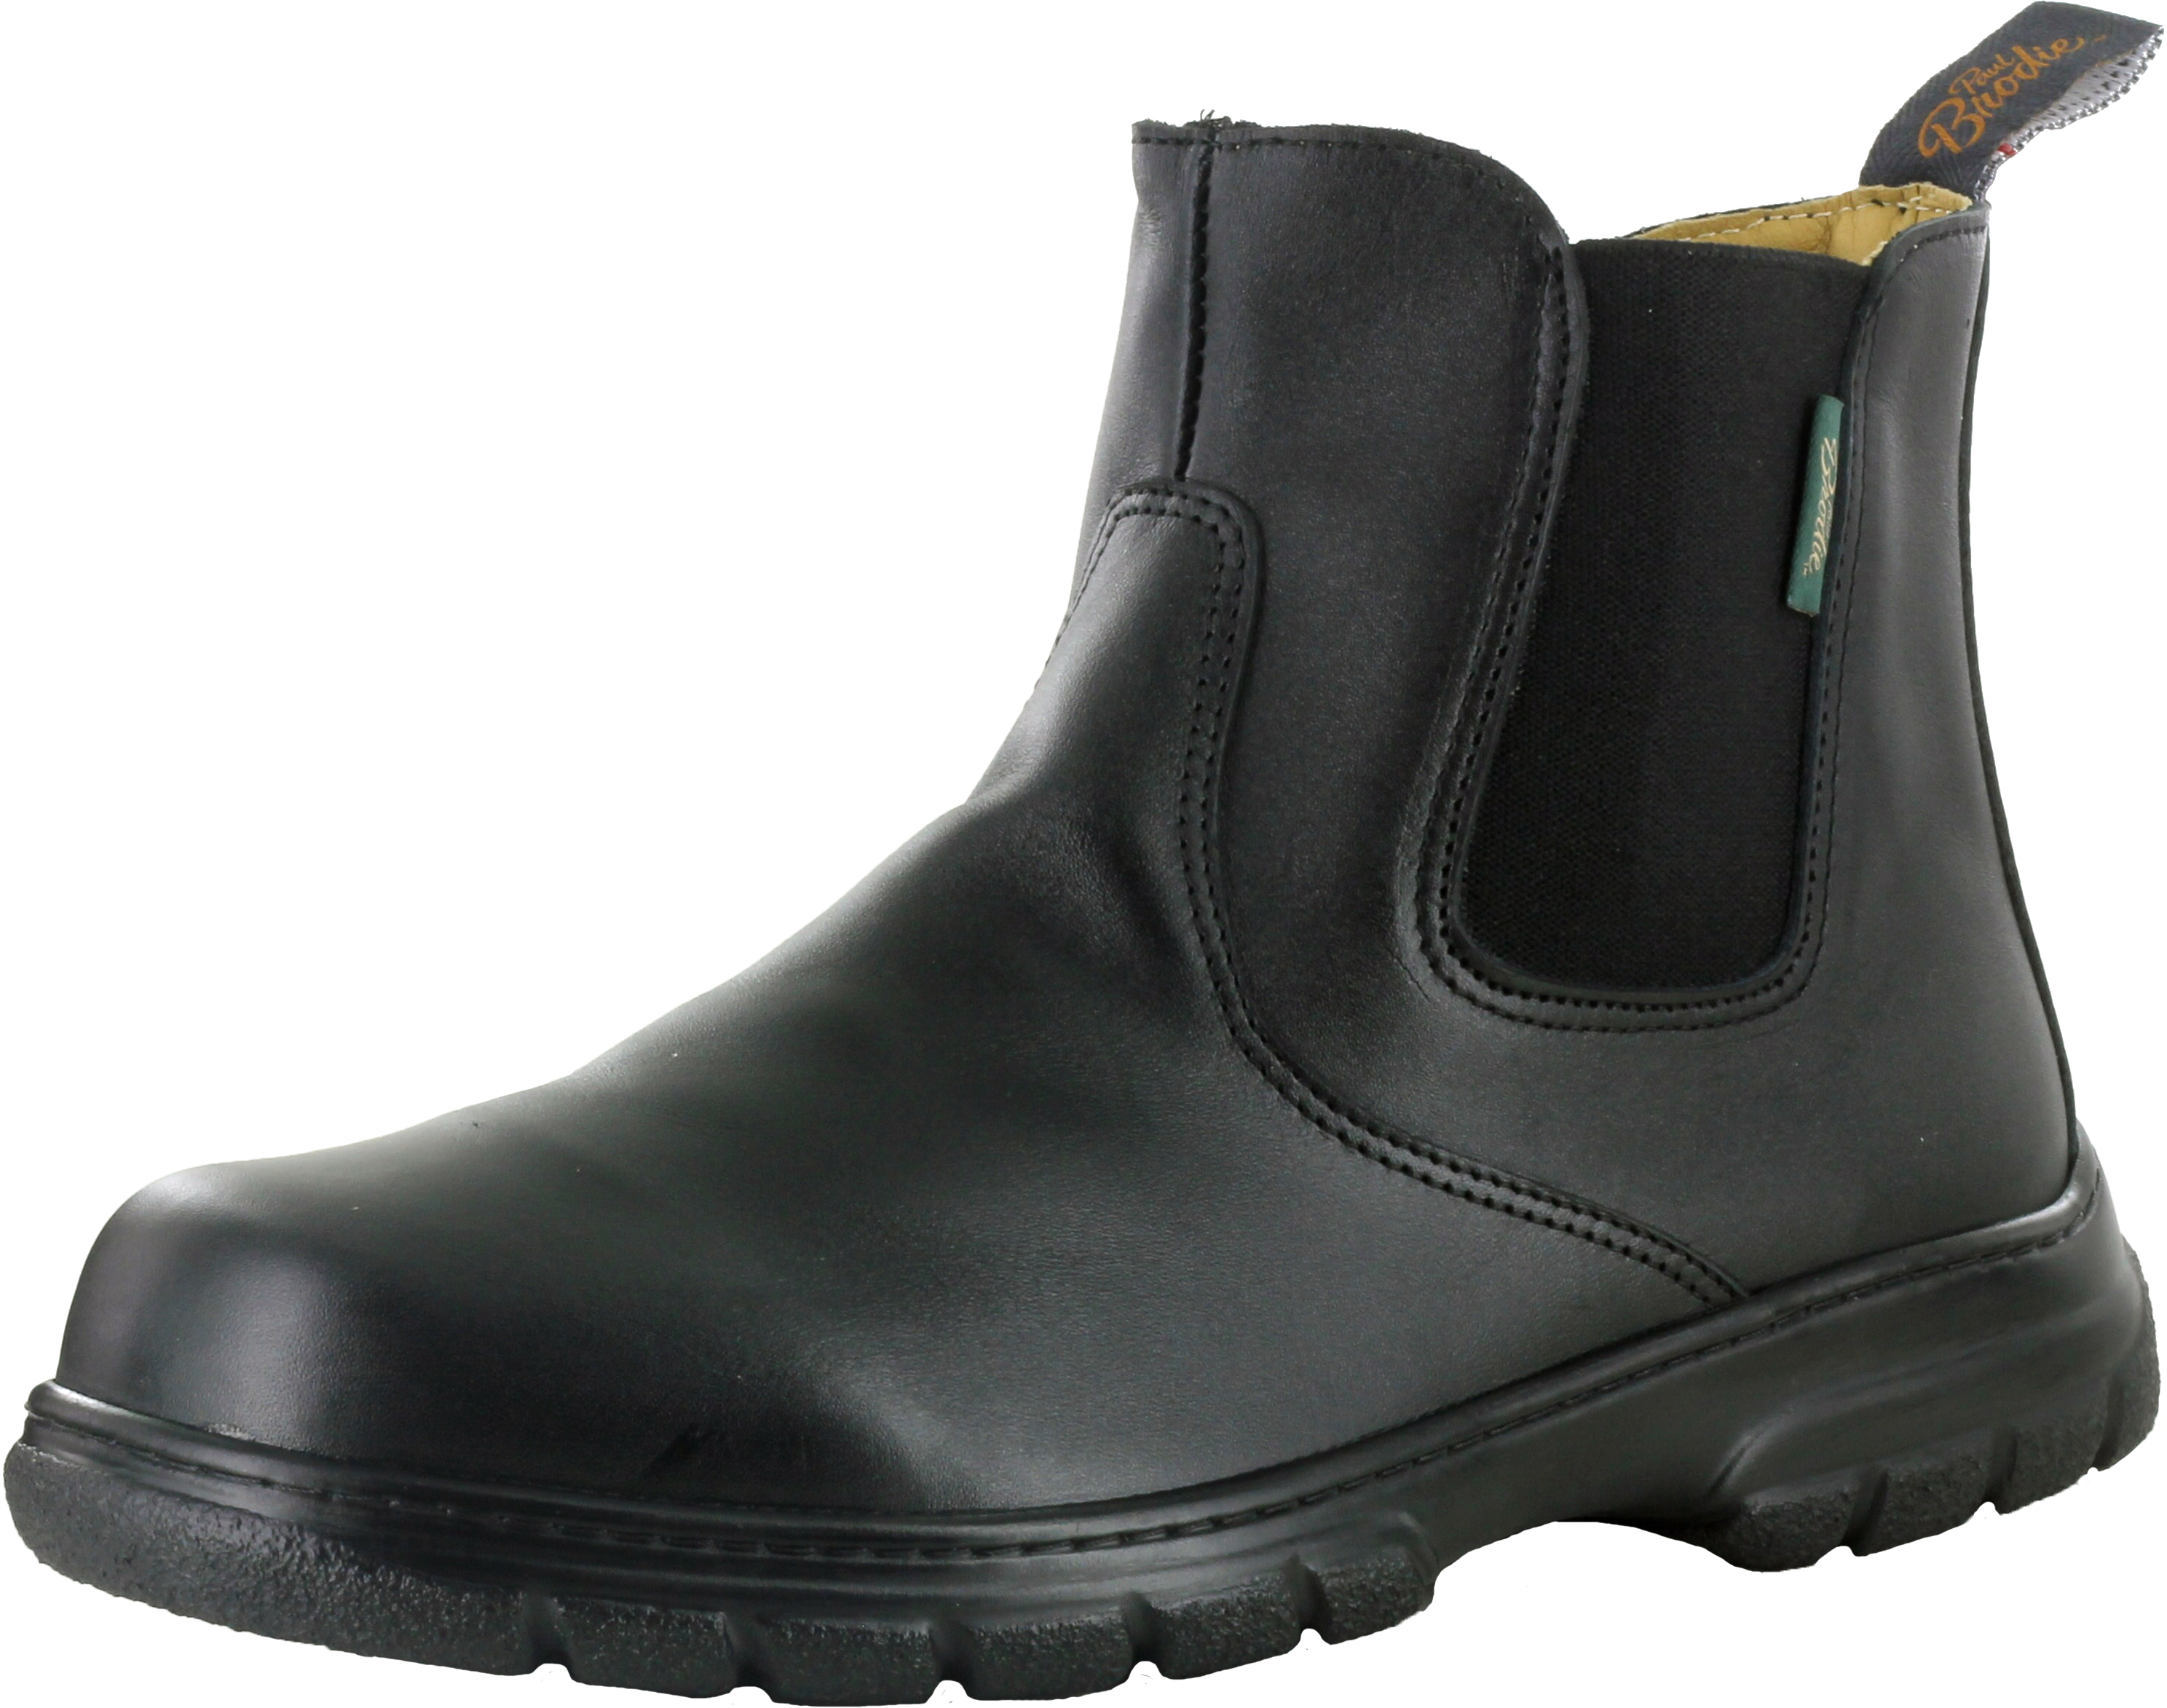 Paul Brodie Double Gore Boot - Black